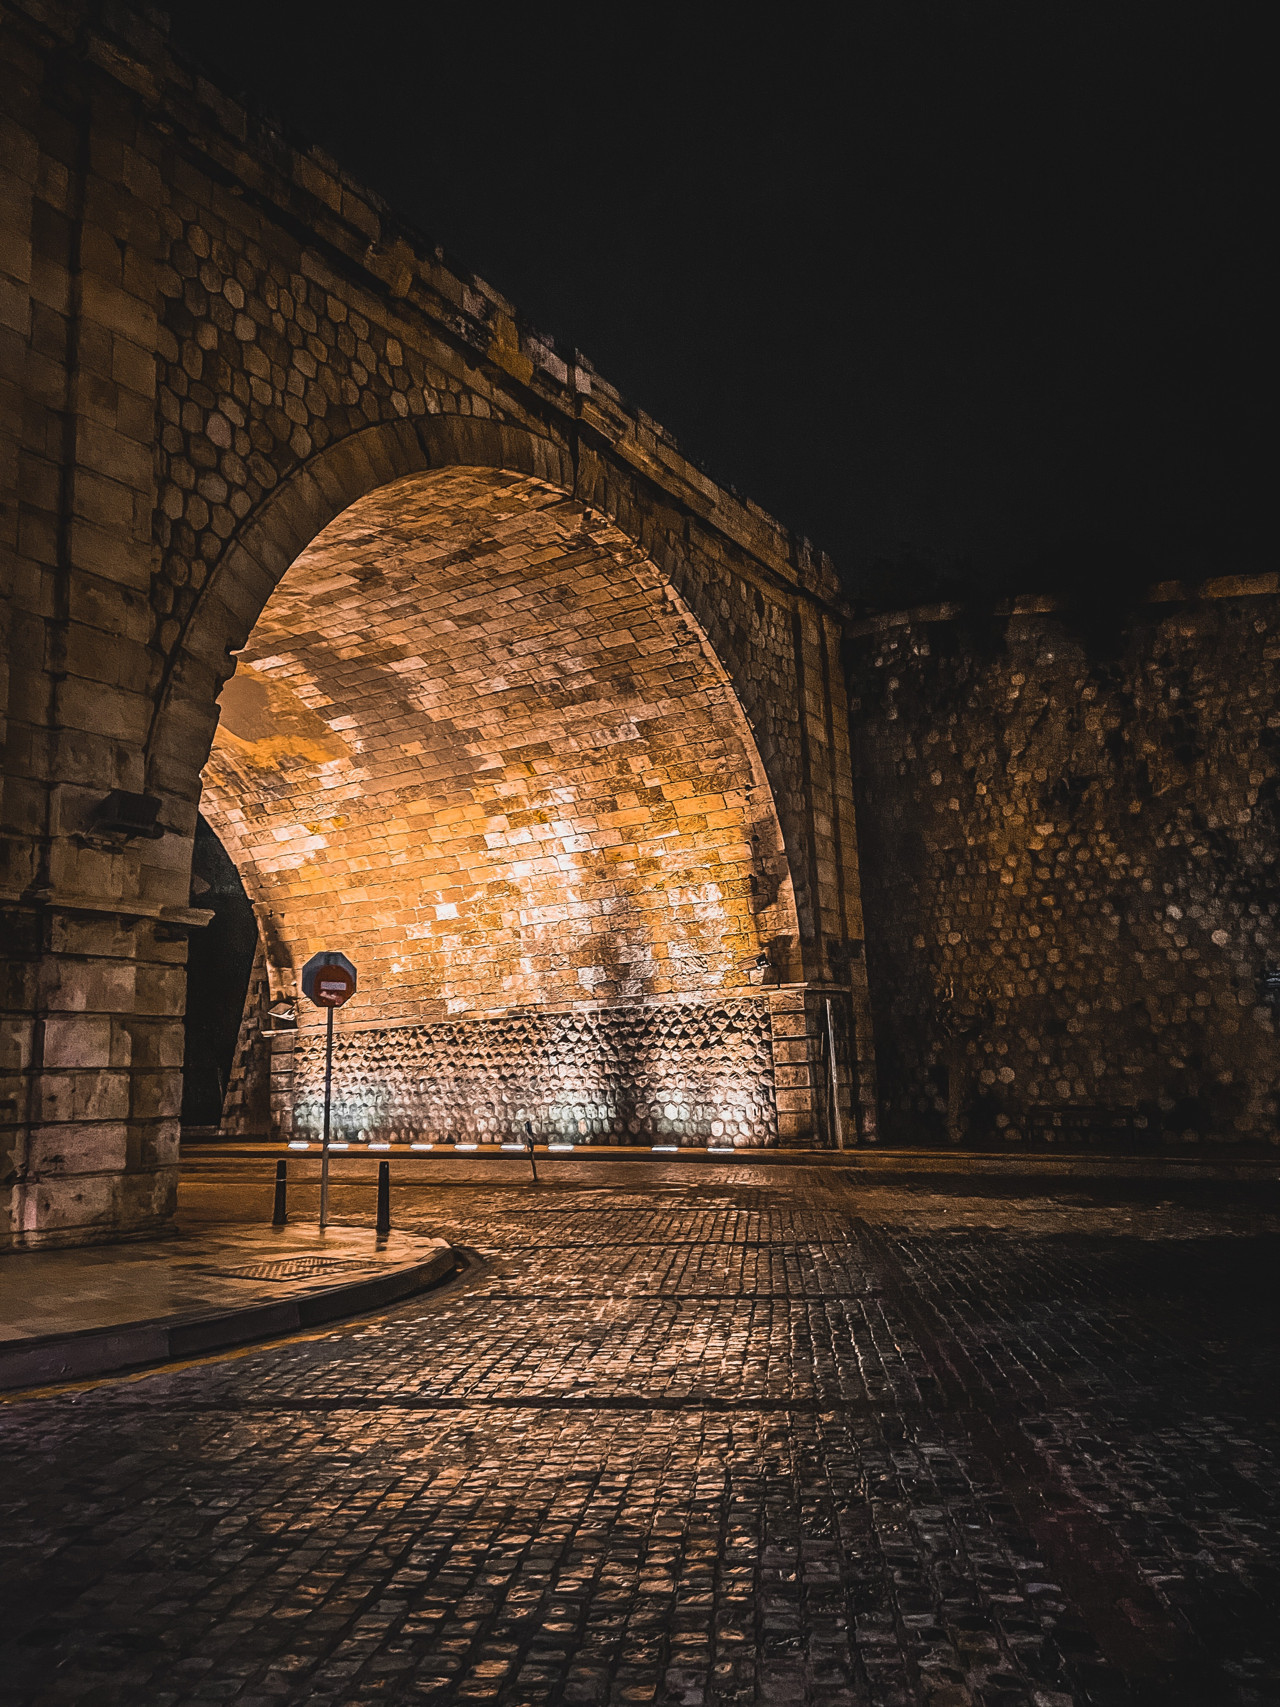 Heraklion Old Town reflects the city's rich history (Arab, Venetian, Ottoman…) 